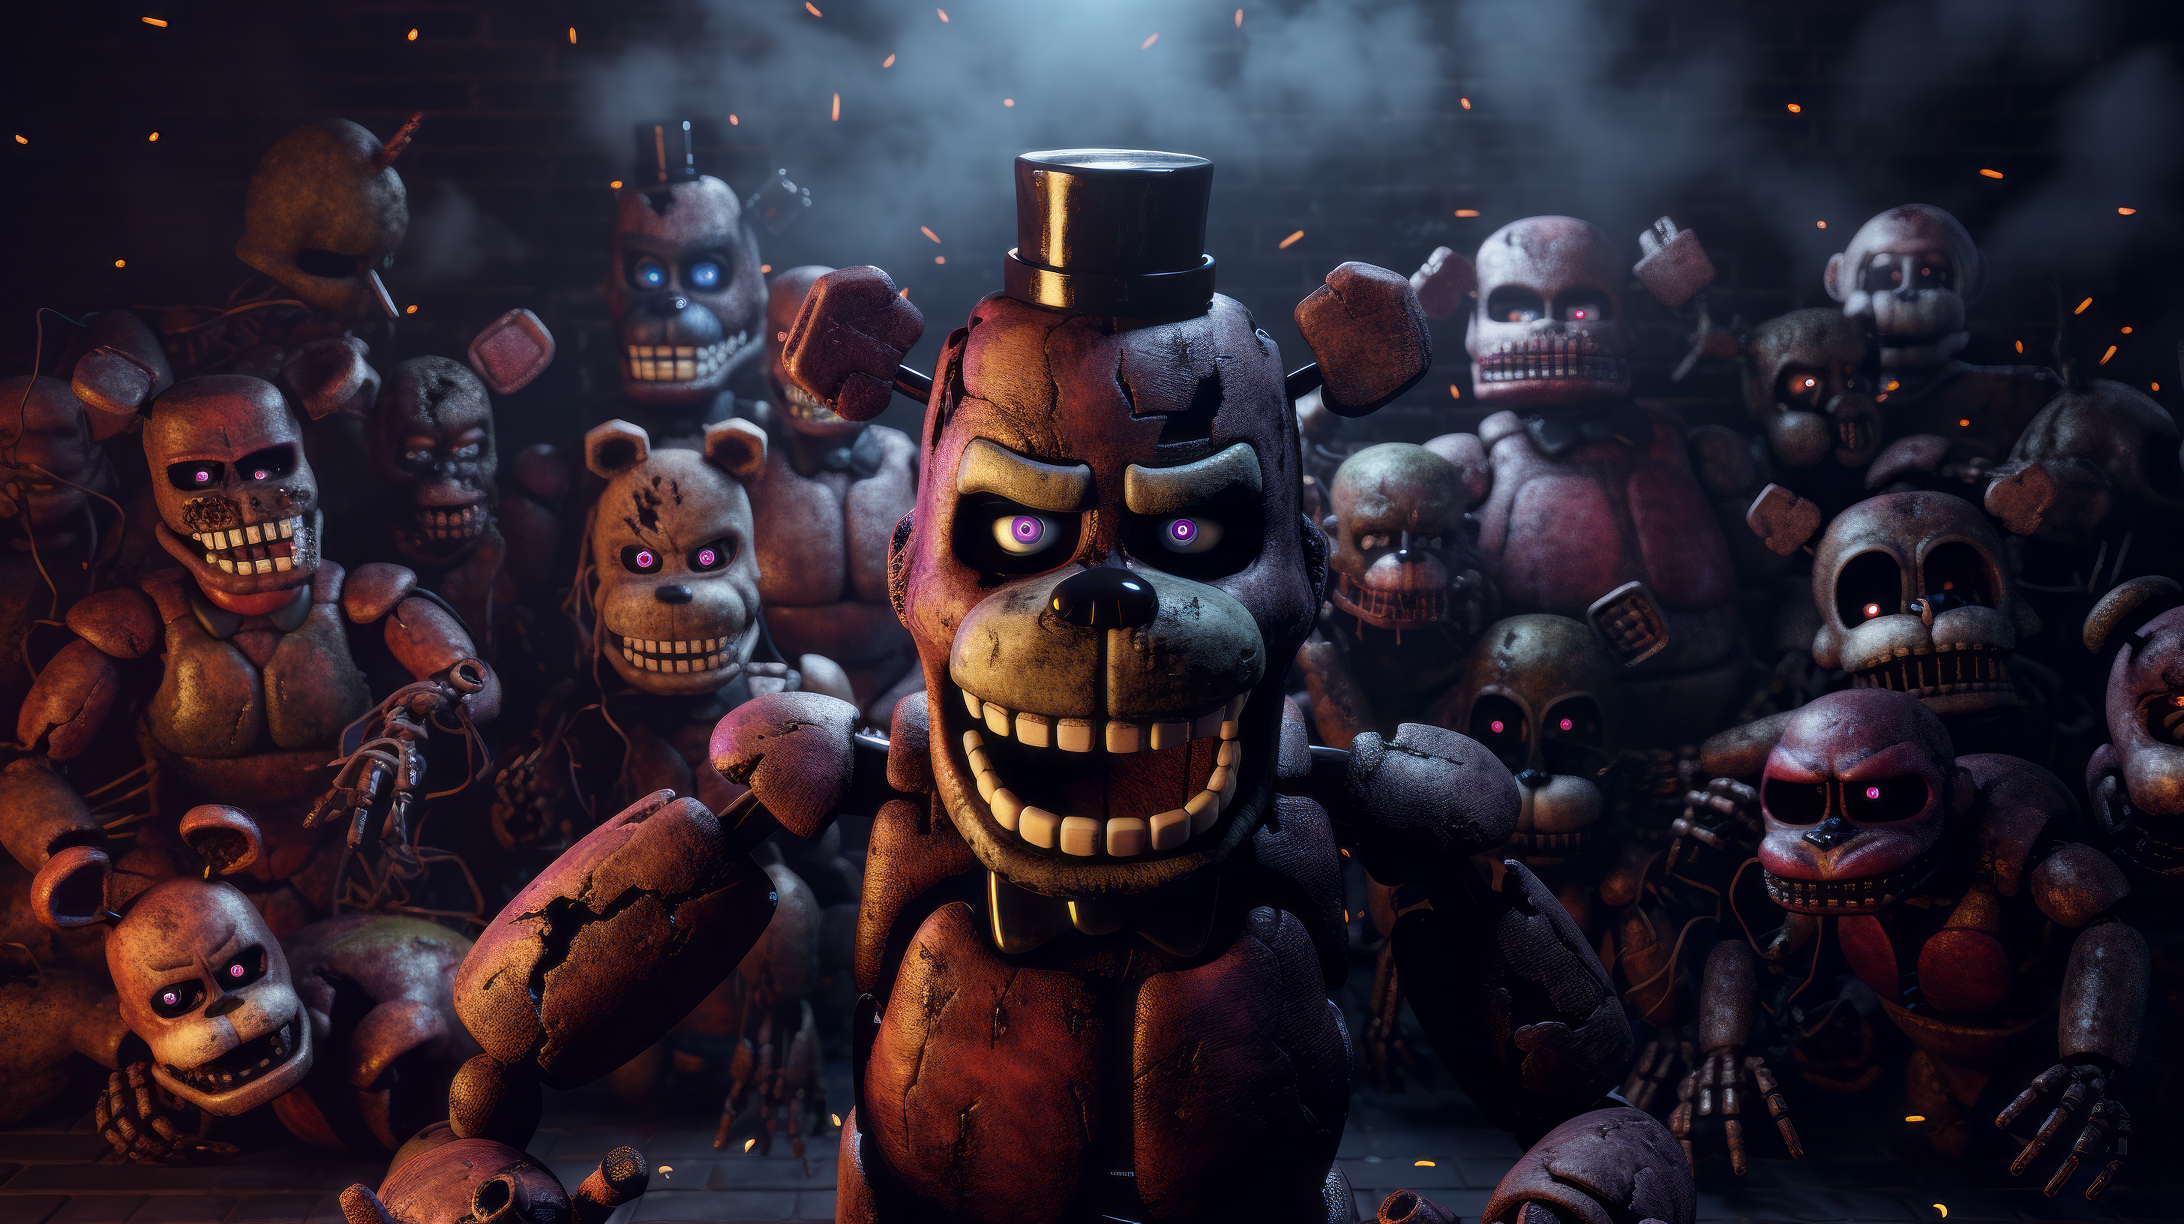 Video Game Five Nights at Freddy's HD Wallpaper | Background Image